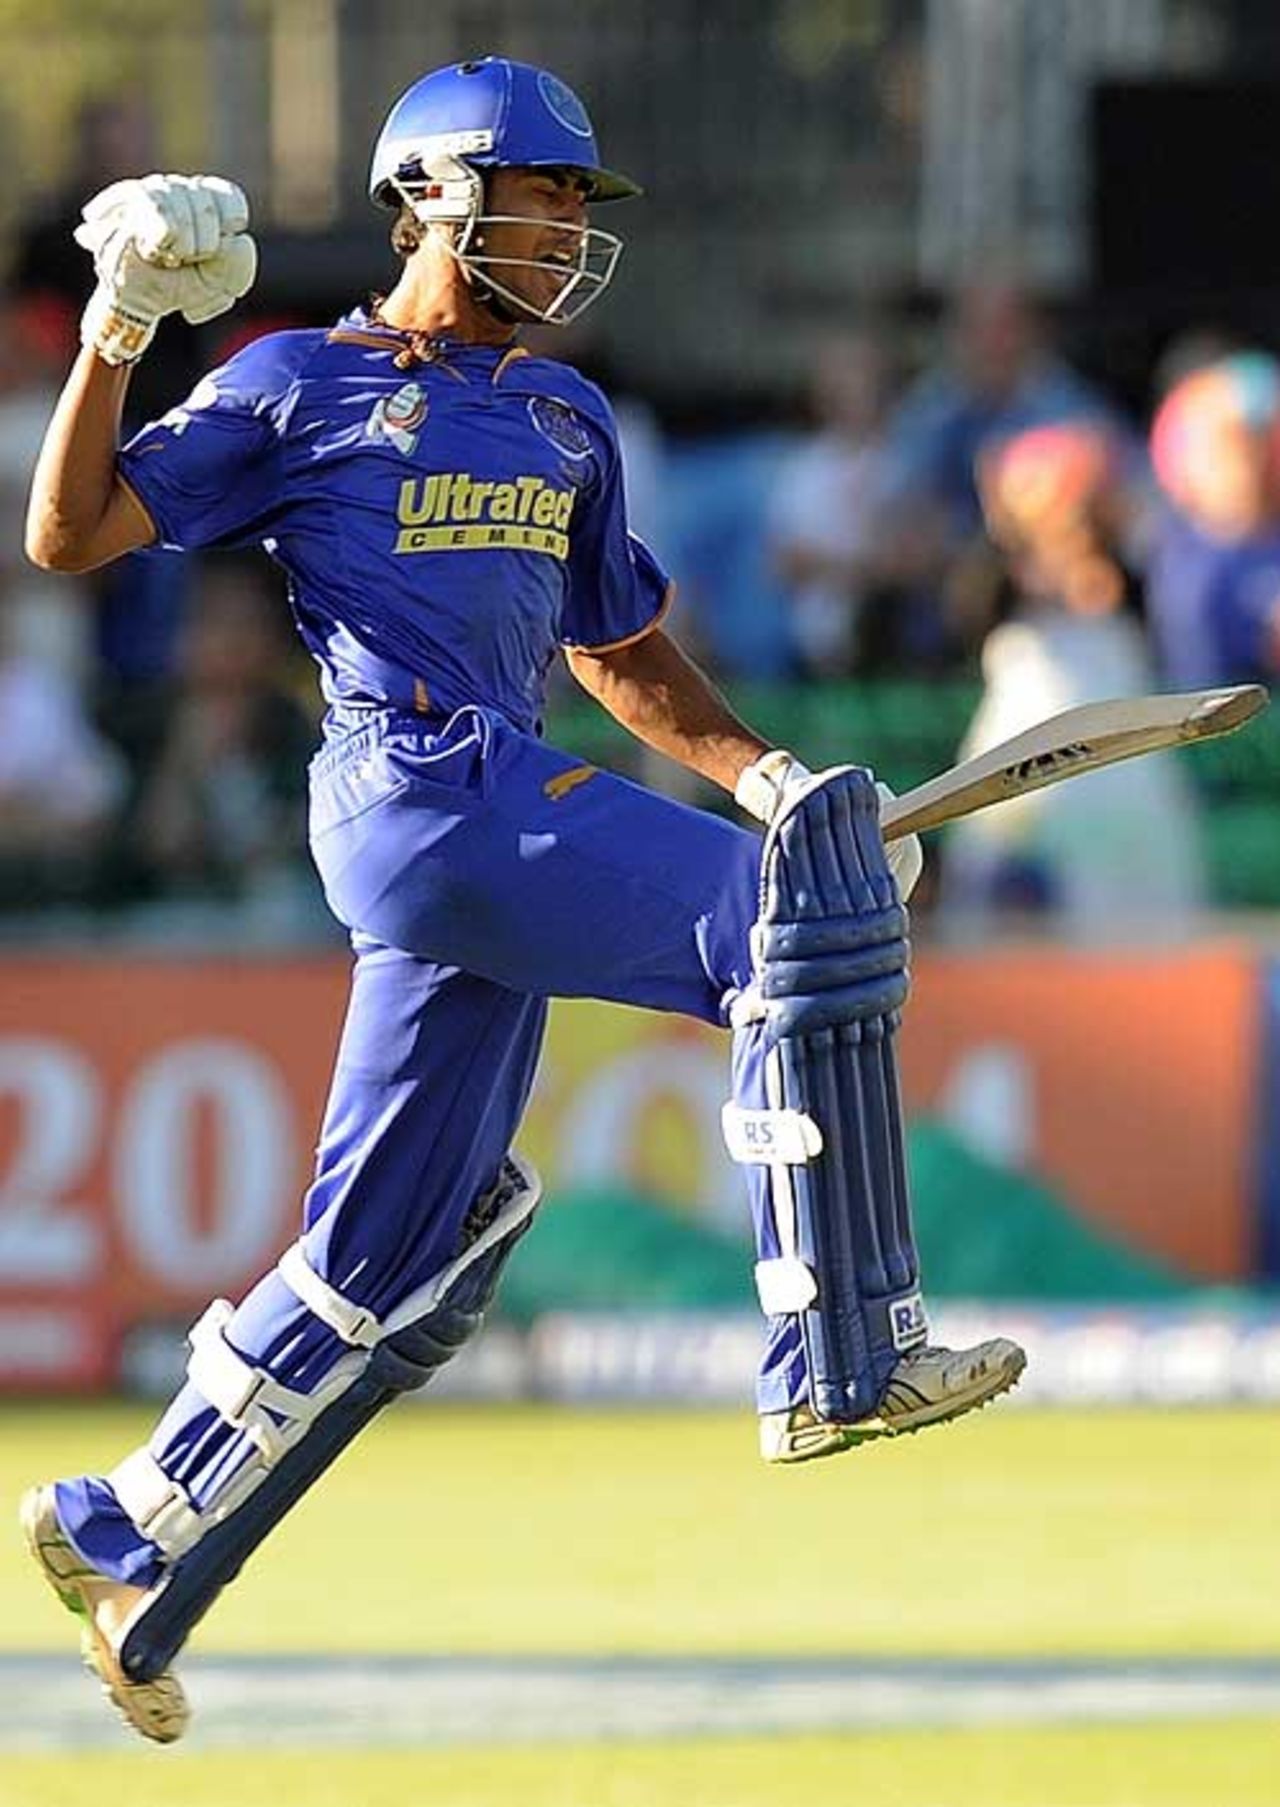 Abhishek Raut punctuates a tense win for Rajasthan, Deccan Chargers v Rajasthan Royals, IPL, 25th match, Port Elizabeth, May 2, 2009